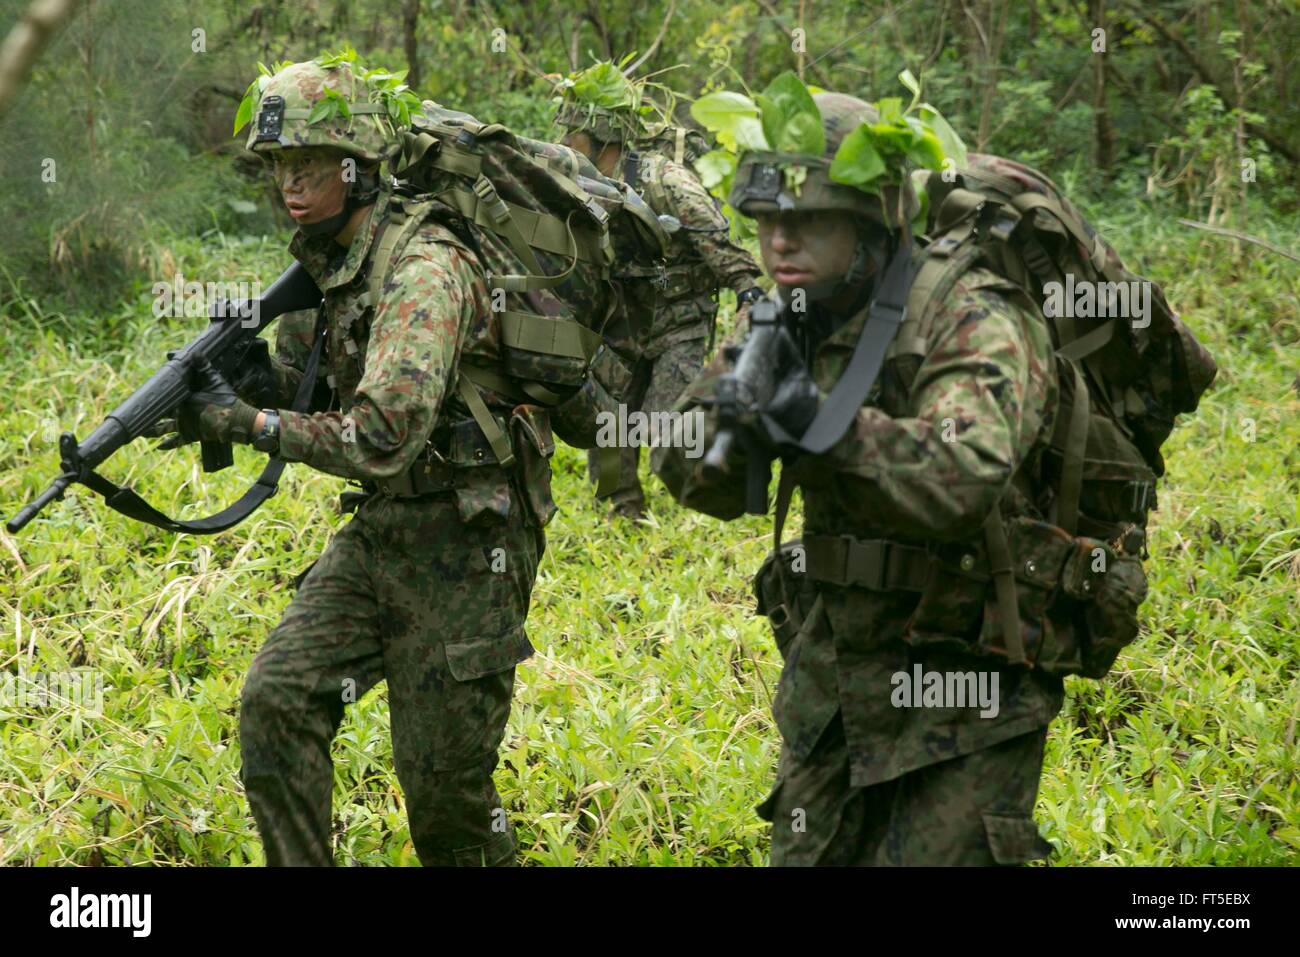 Japan Ground Self-Defense Force soldiers secure an outpost during a raid mission training at Kin Blue March 11, 2016 in Okinawa Japan. Stock Photo